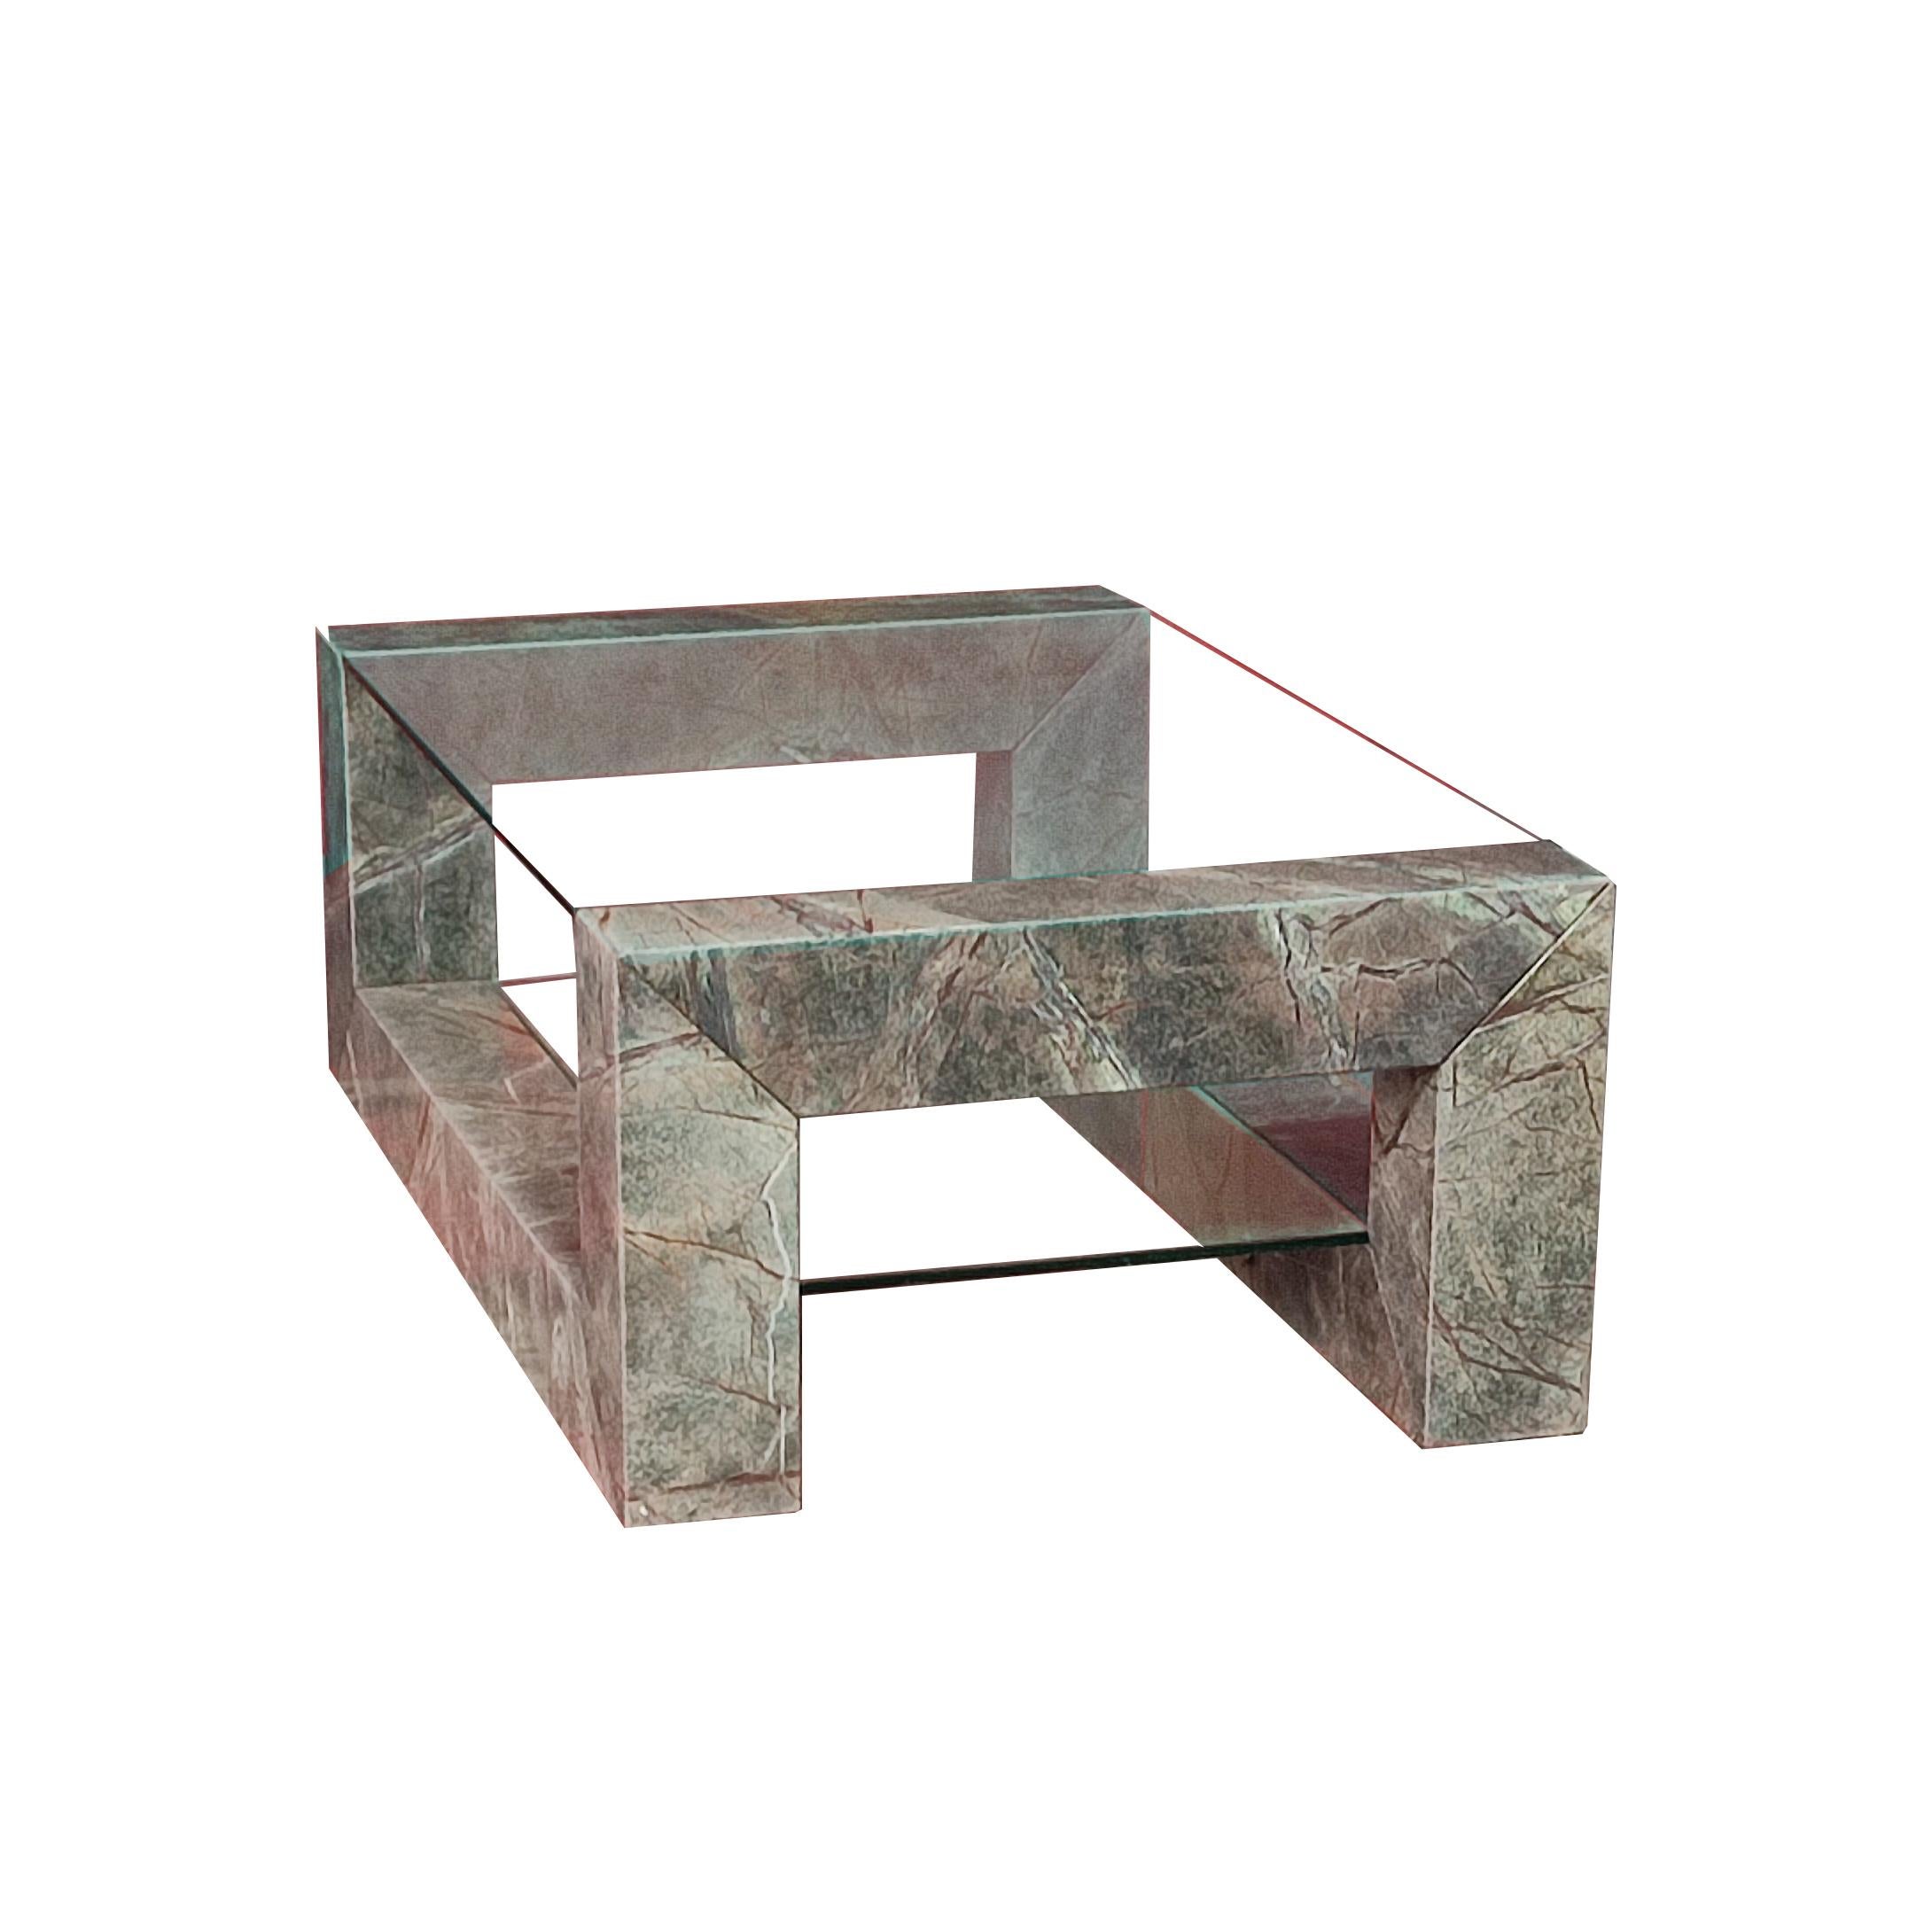 DEVON Green Marble Coffee Table Contemporary Design Spain by Joaquín Moll Meddel

The Devon coffee table is a piece of furniture that perfectly blends style and functionality in a single design. A creation of Joaquín Moll for Meddel, a design that